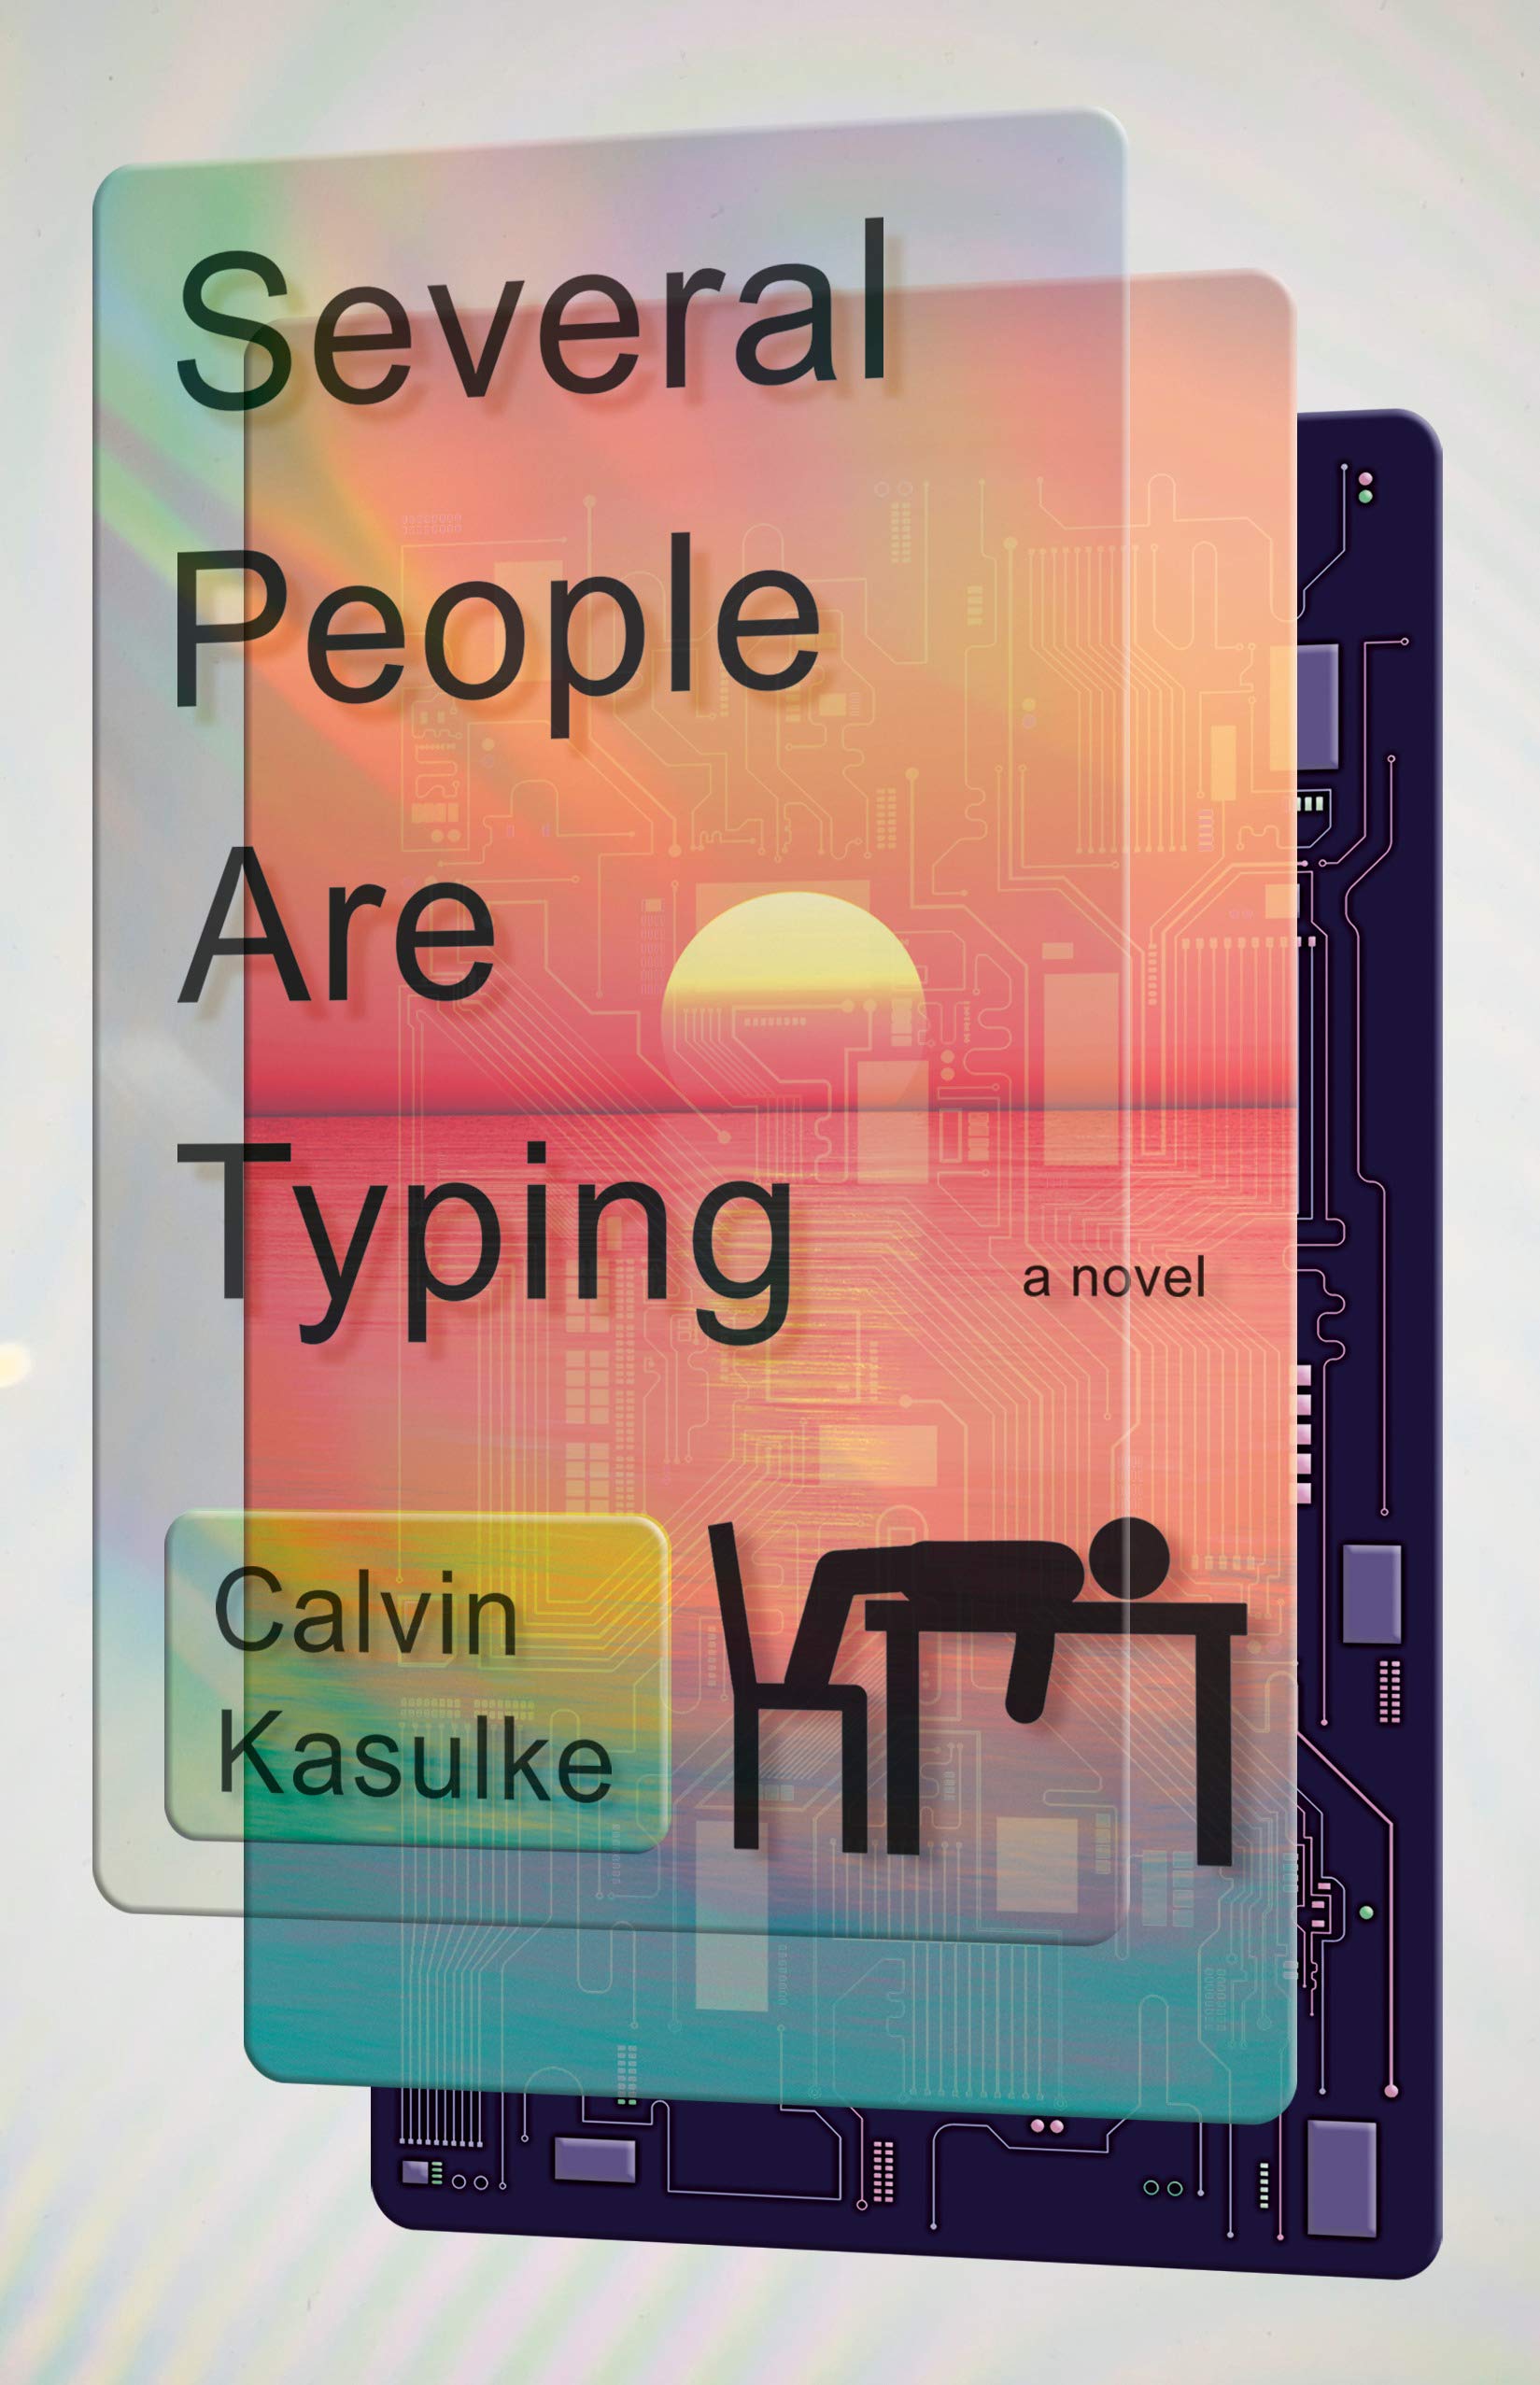 several people are typing calvin kasulke